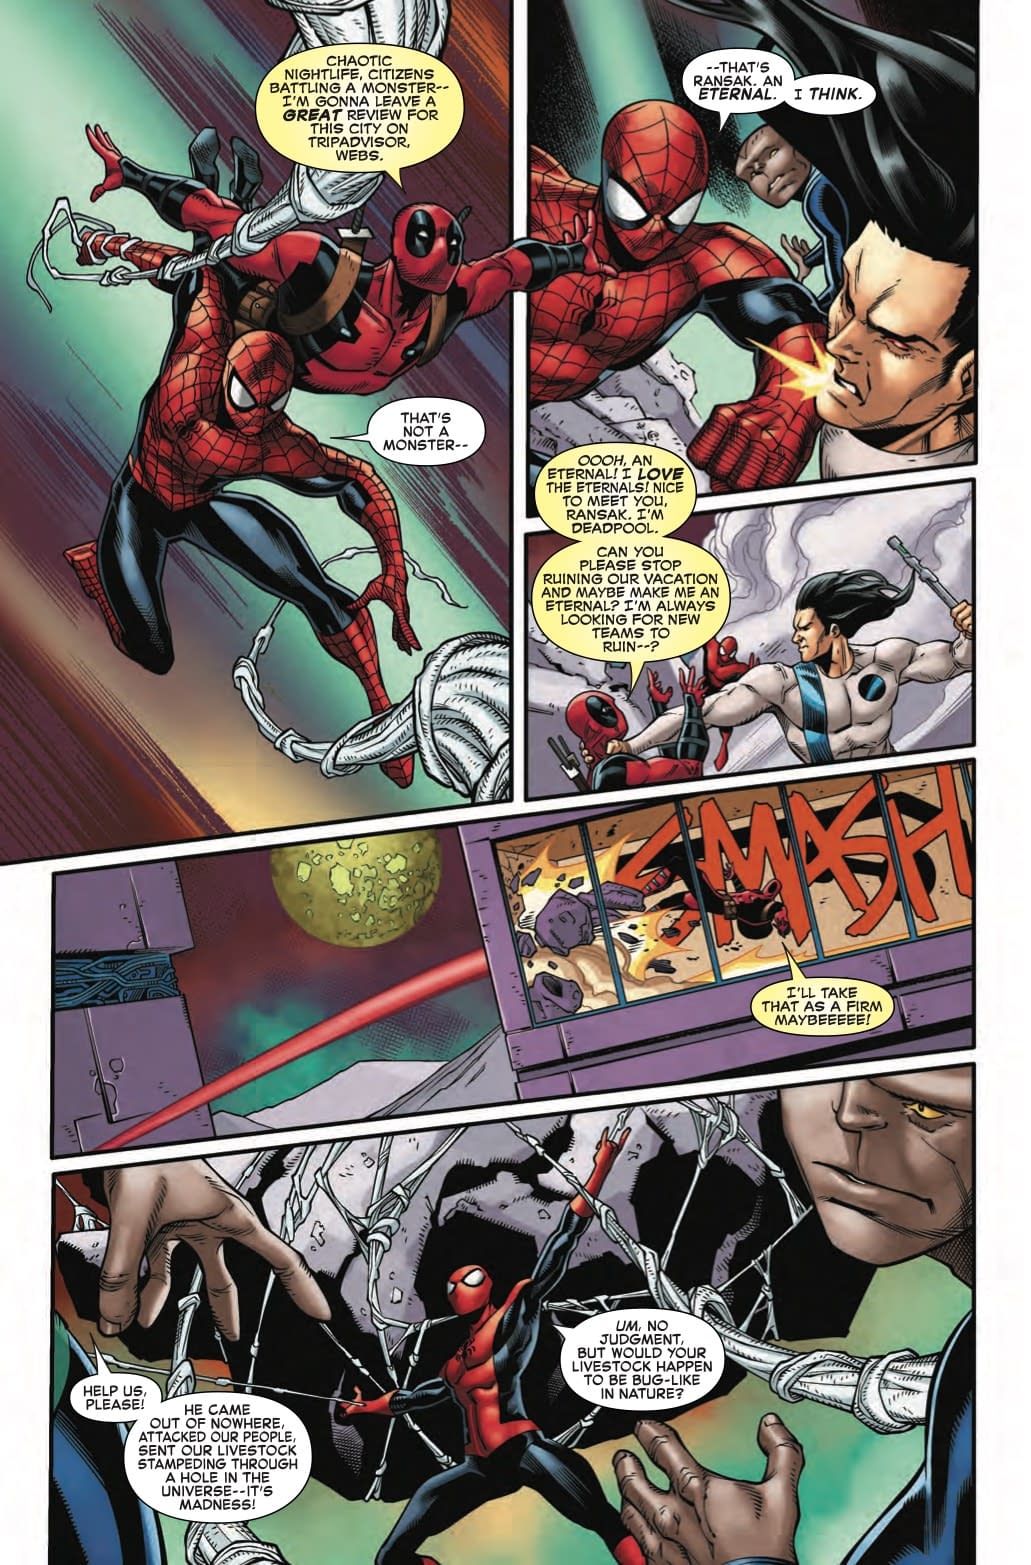 Deadpool Tries to Join an MCU Franchise in Next Week's Spider-Man/Deadpool #43